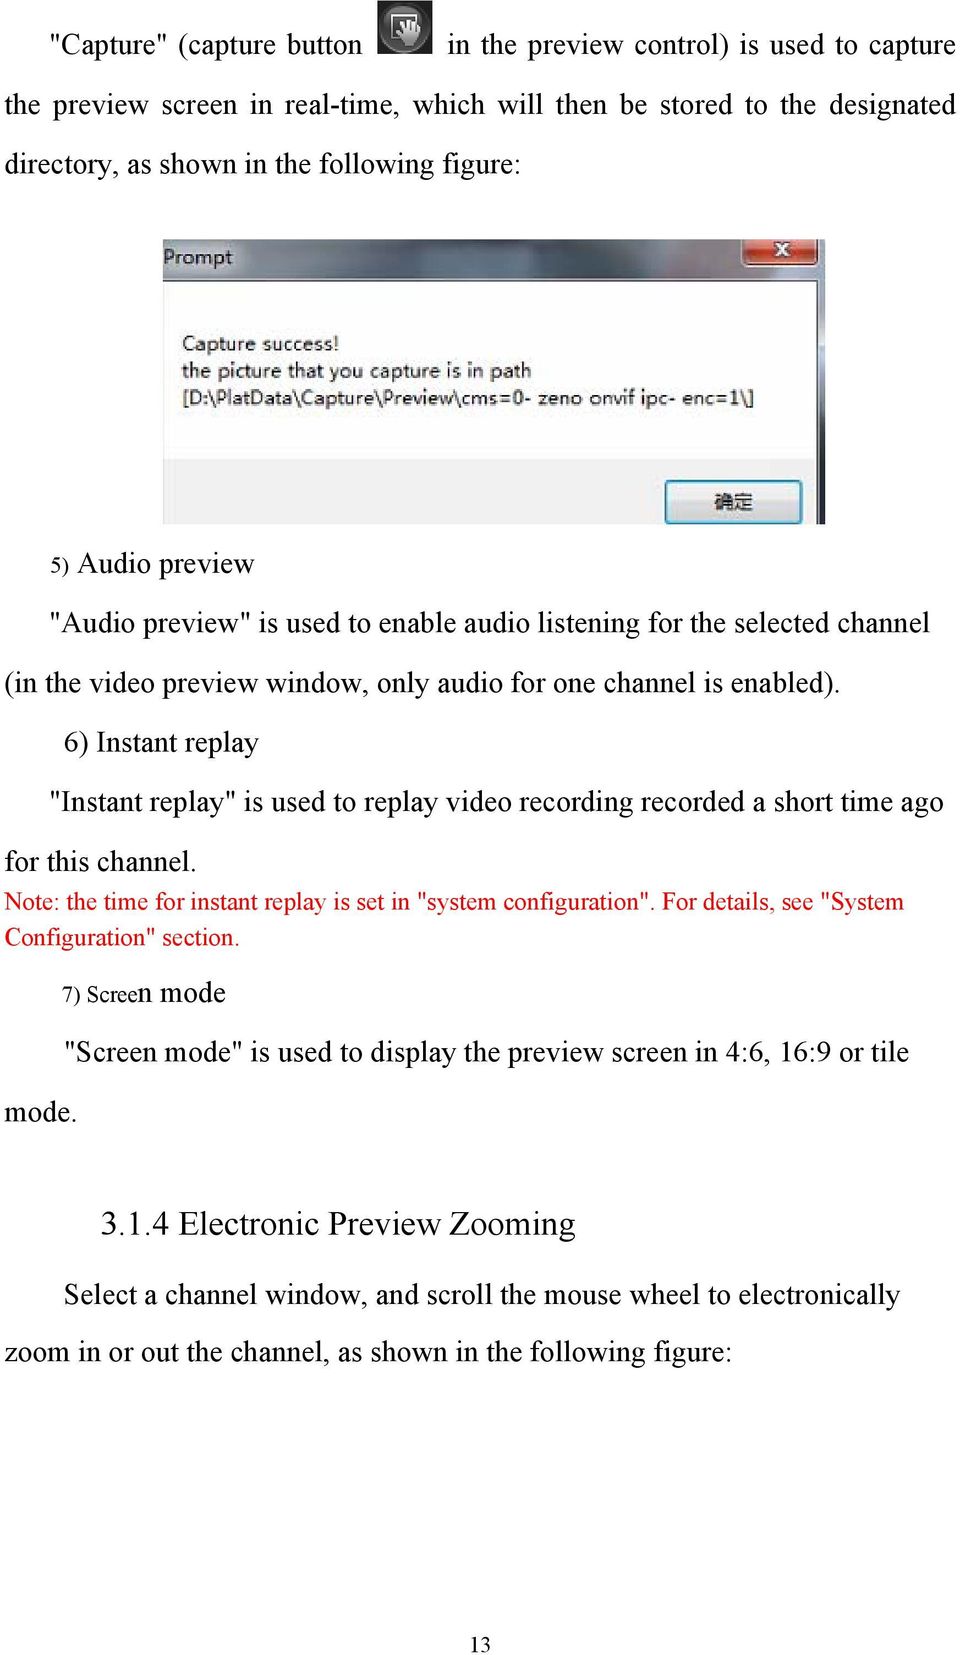 6) Instant replay "Instant replay" is used to replay video recording recorded a short time ago for this channel. Note: the time for instant replay is set in "system configuration".